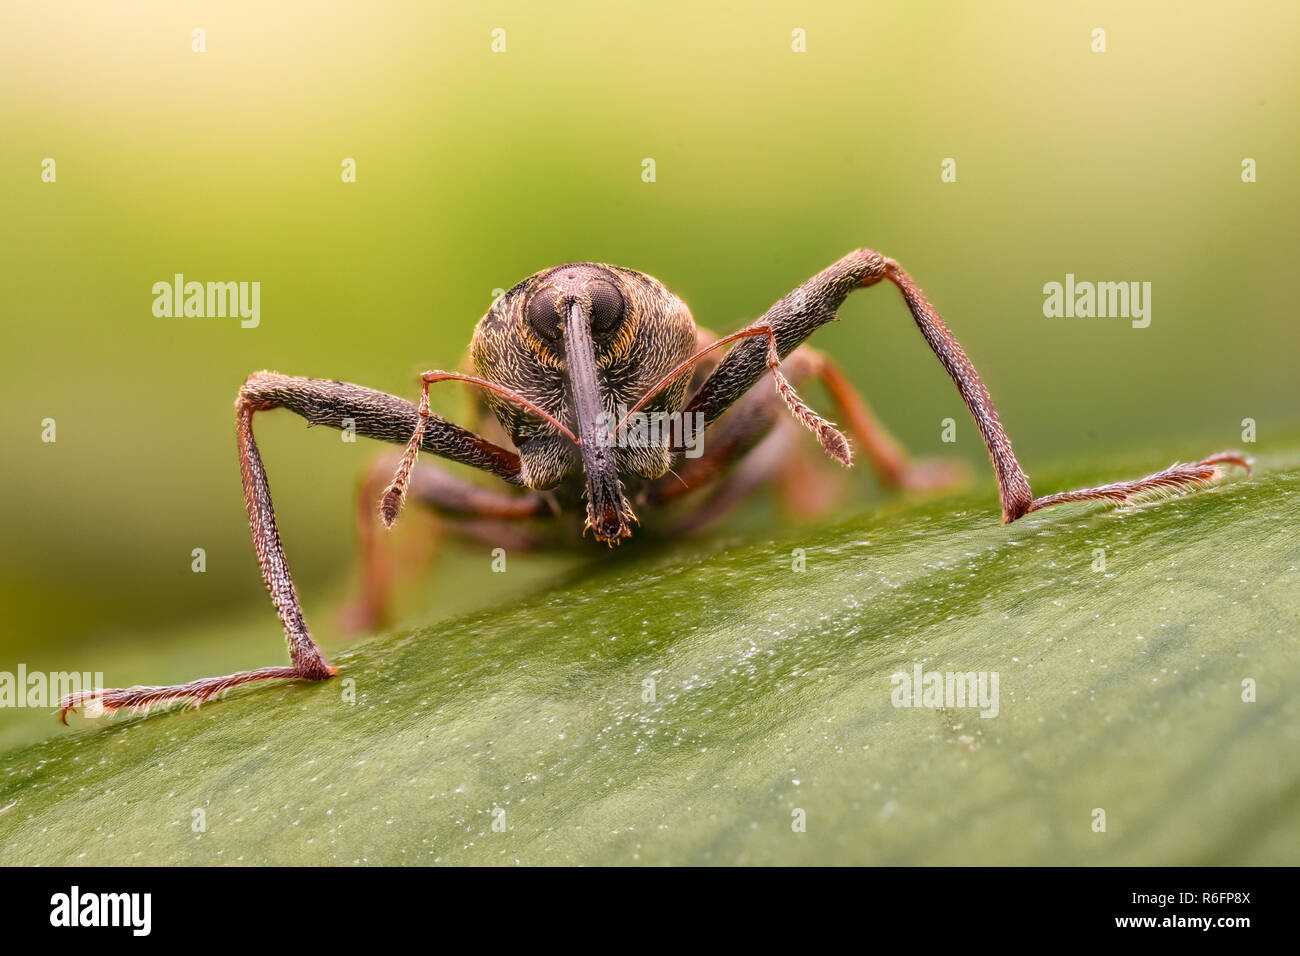 Extreme magnification - Weevil in the wild Stock Photo